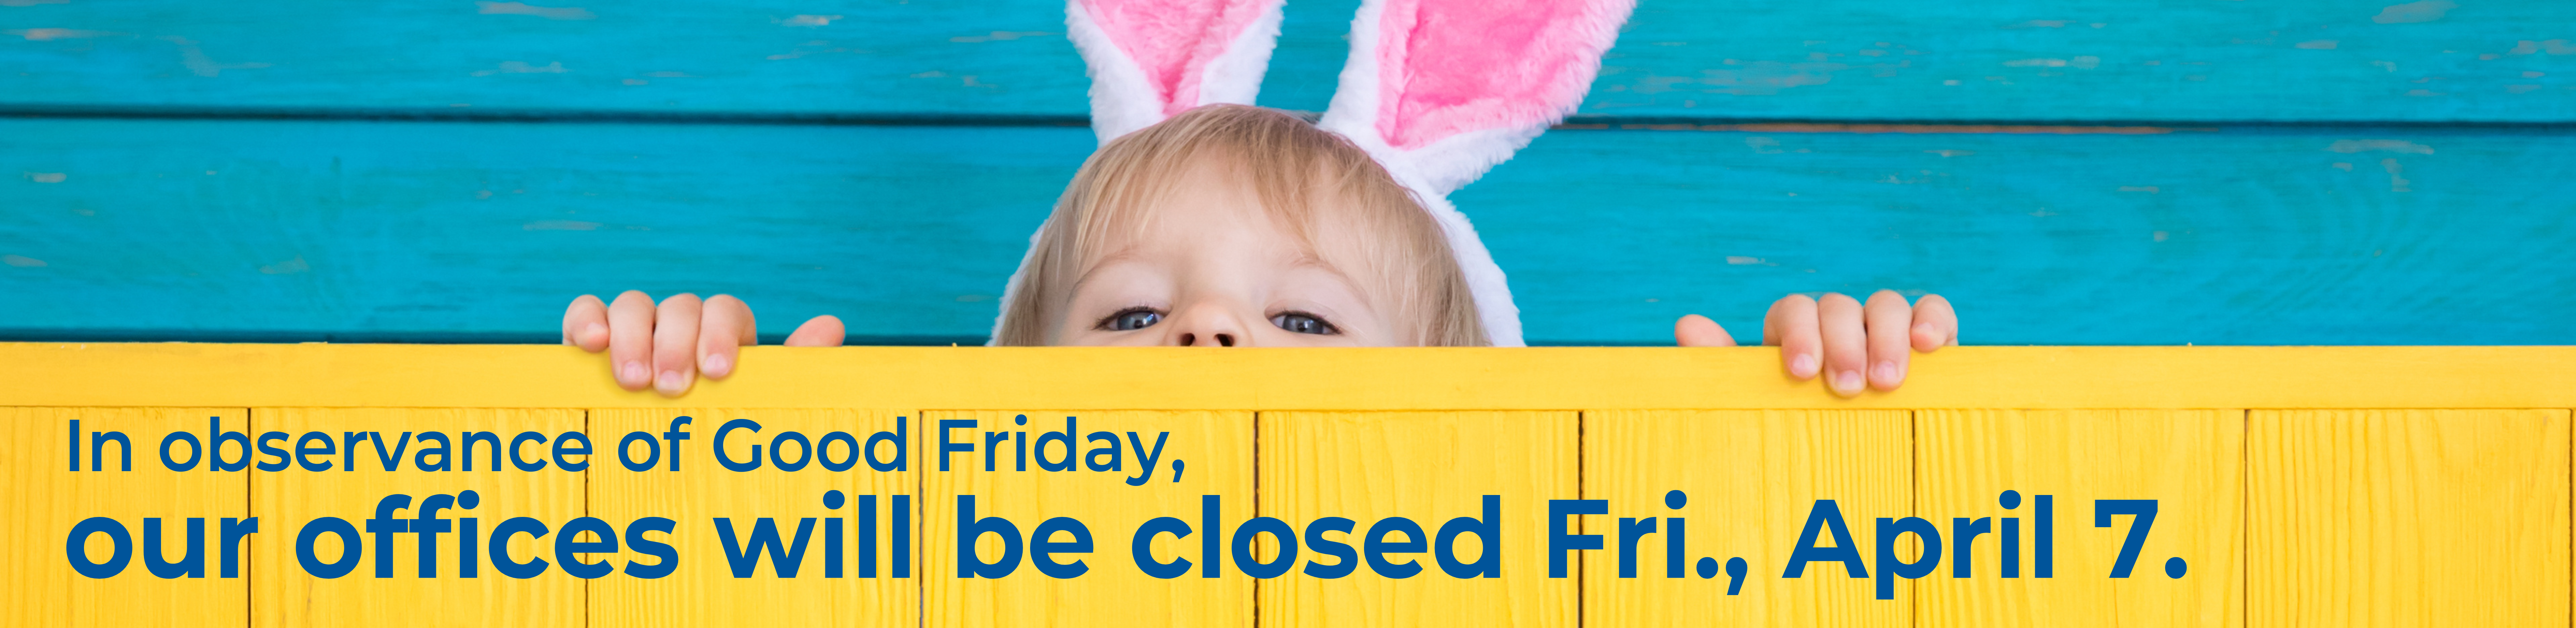 Easter closure notice for 4/07